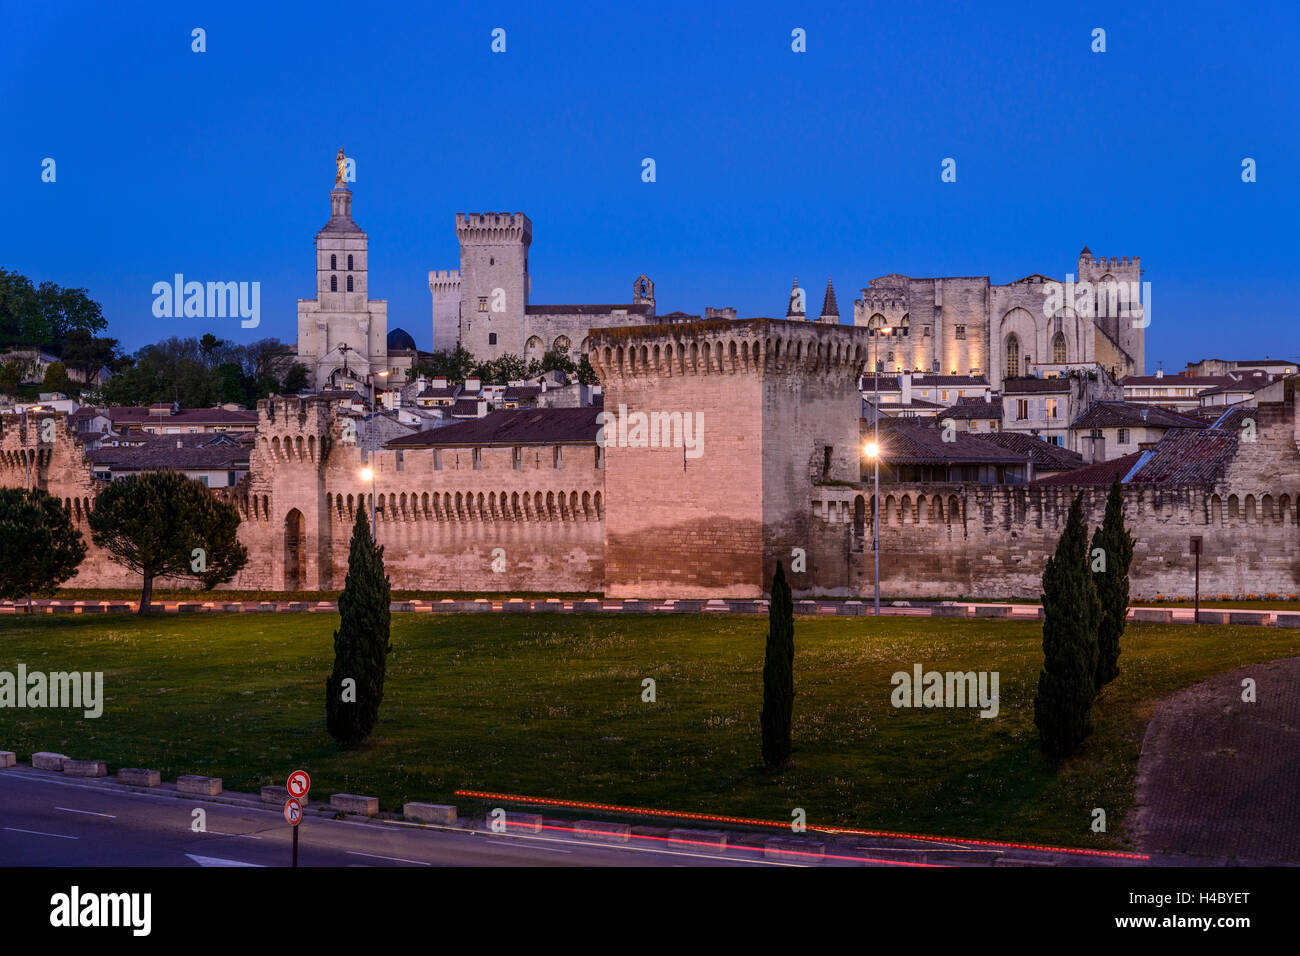 France, Provence, Vaucluse, Avignon, old town, city wall, Papal palace, view from the Pont Edouard Daladier Stock Photo